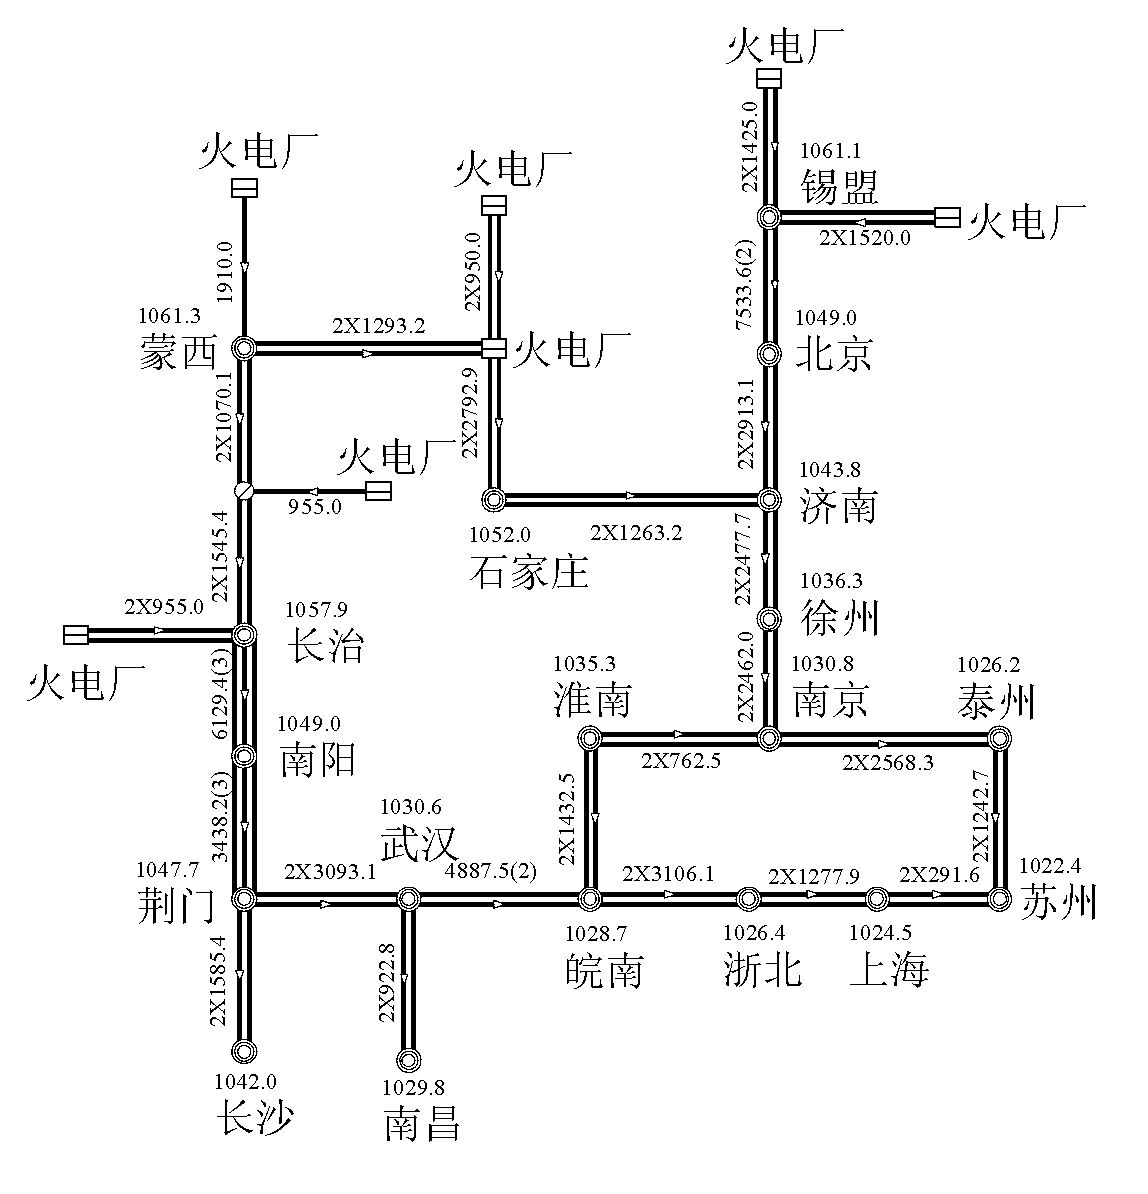 Multilevel automatic voltage reactive power control system AVC coordination control method